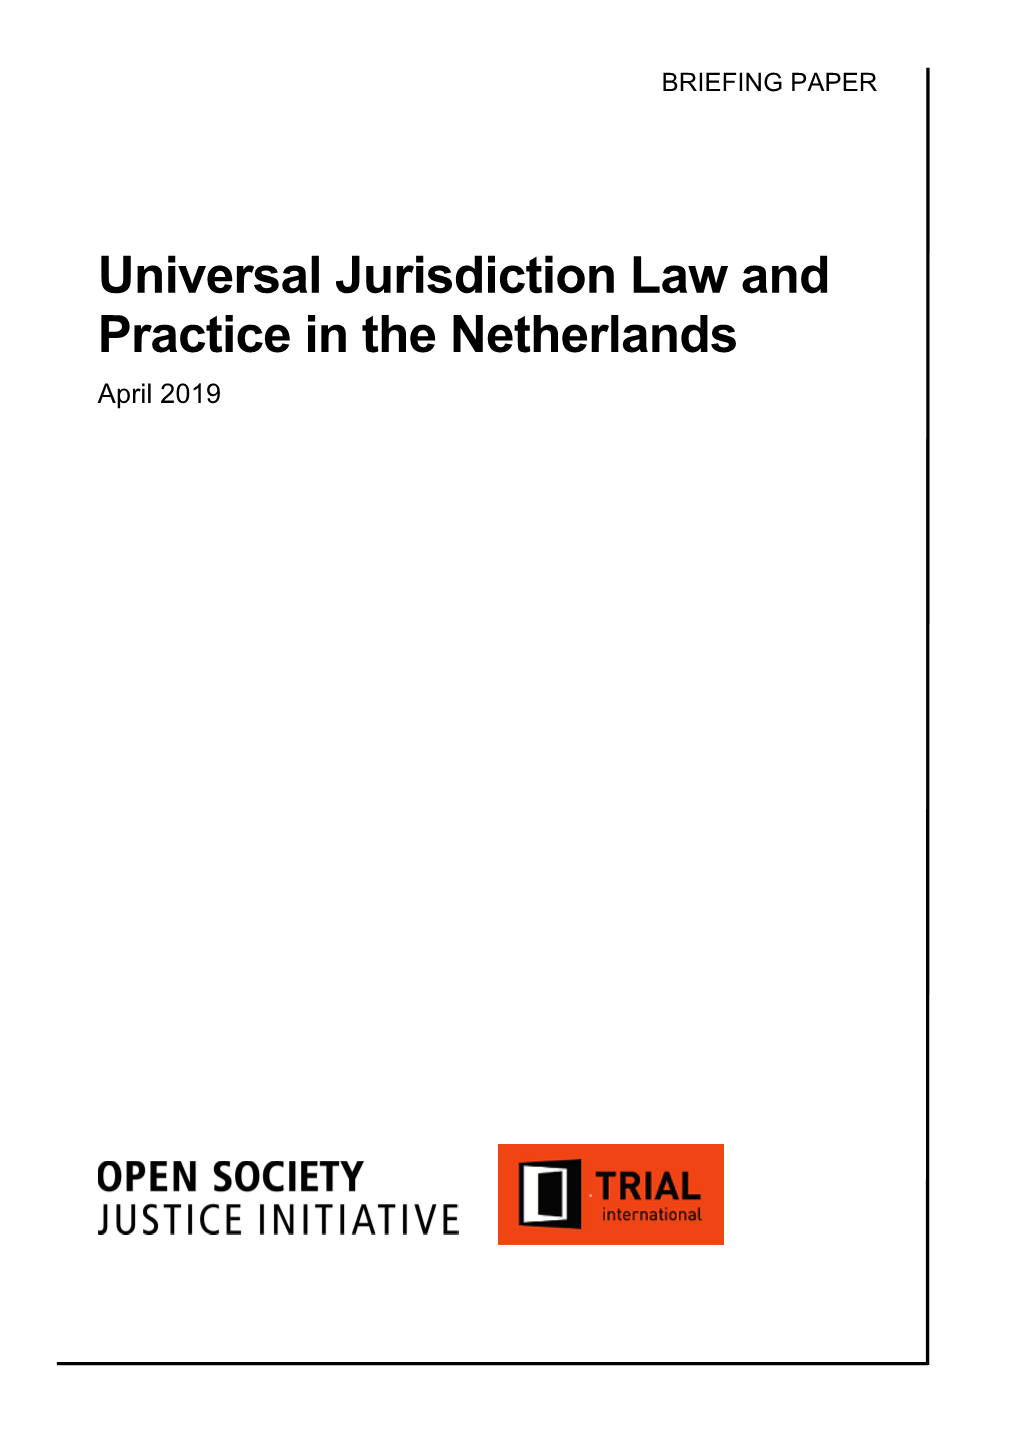 Universal Jurisdiction Law and Practice in the Netherlands April 2019